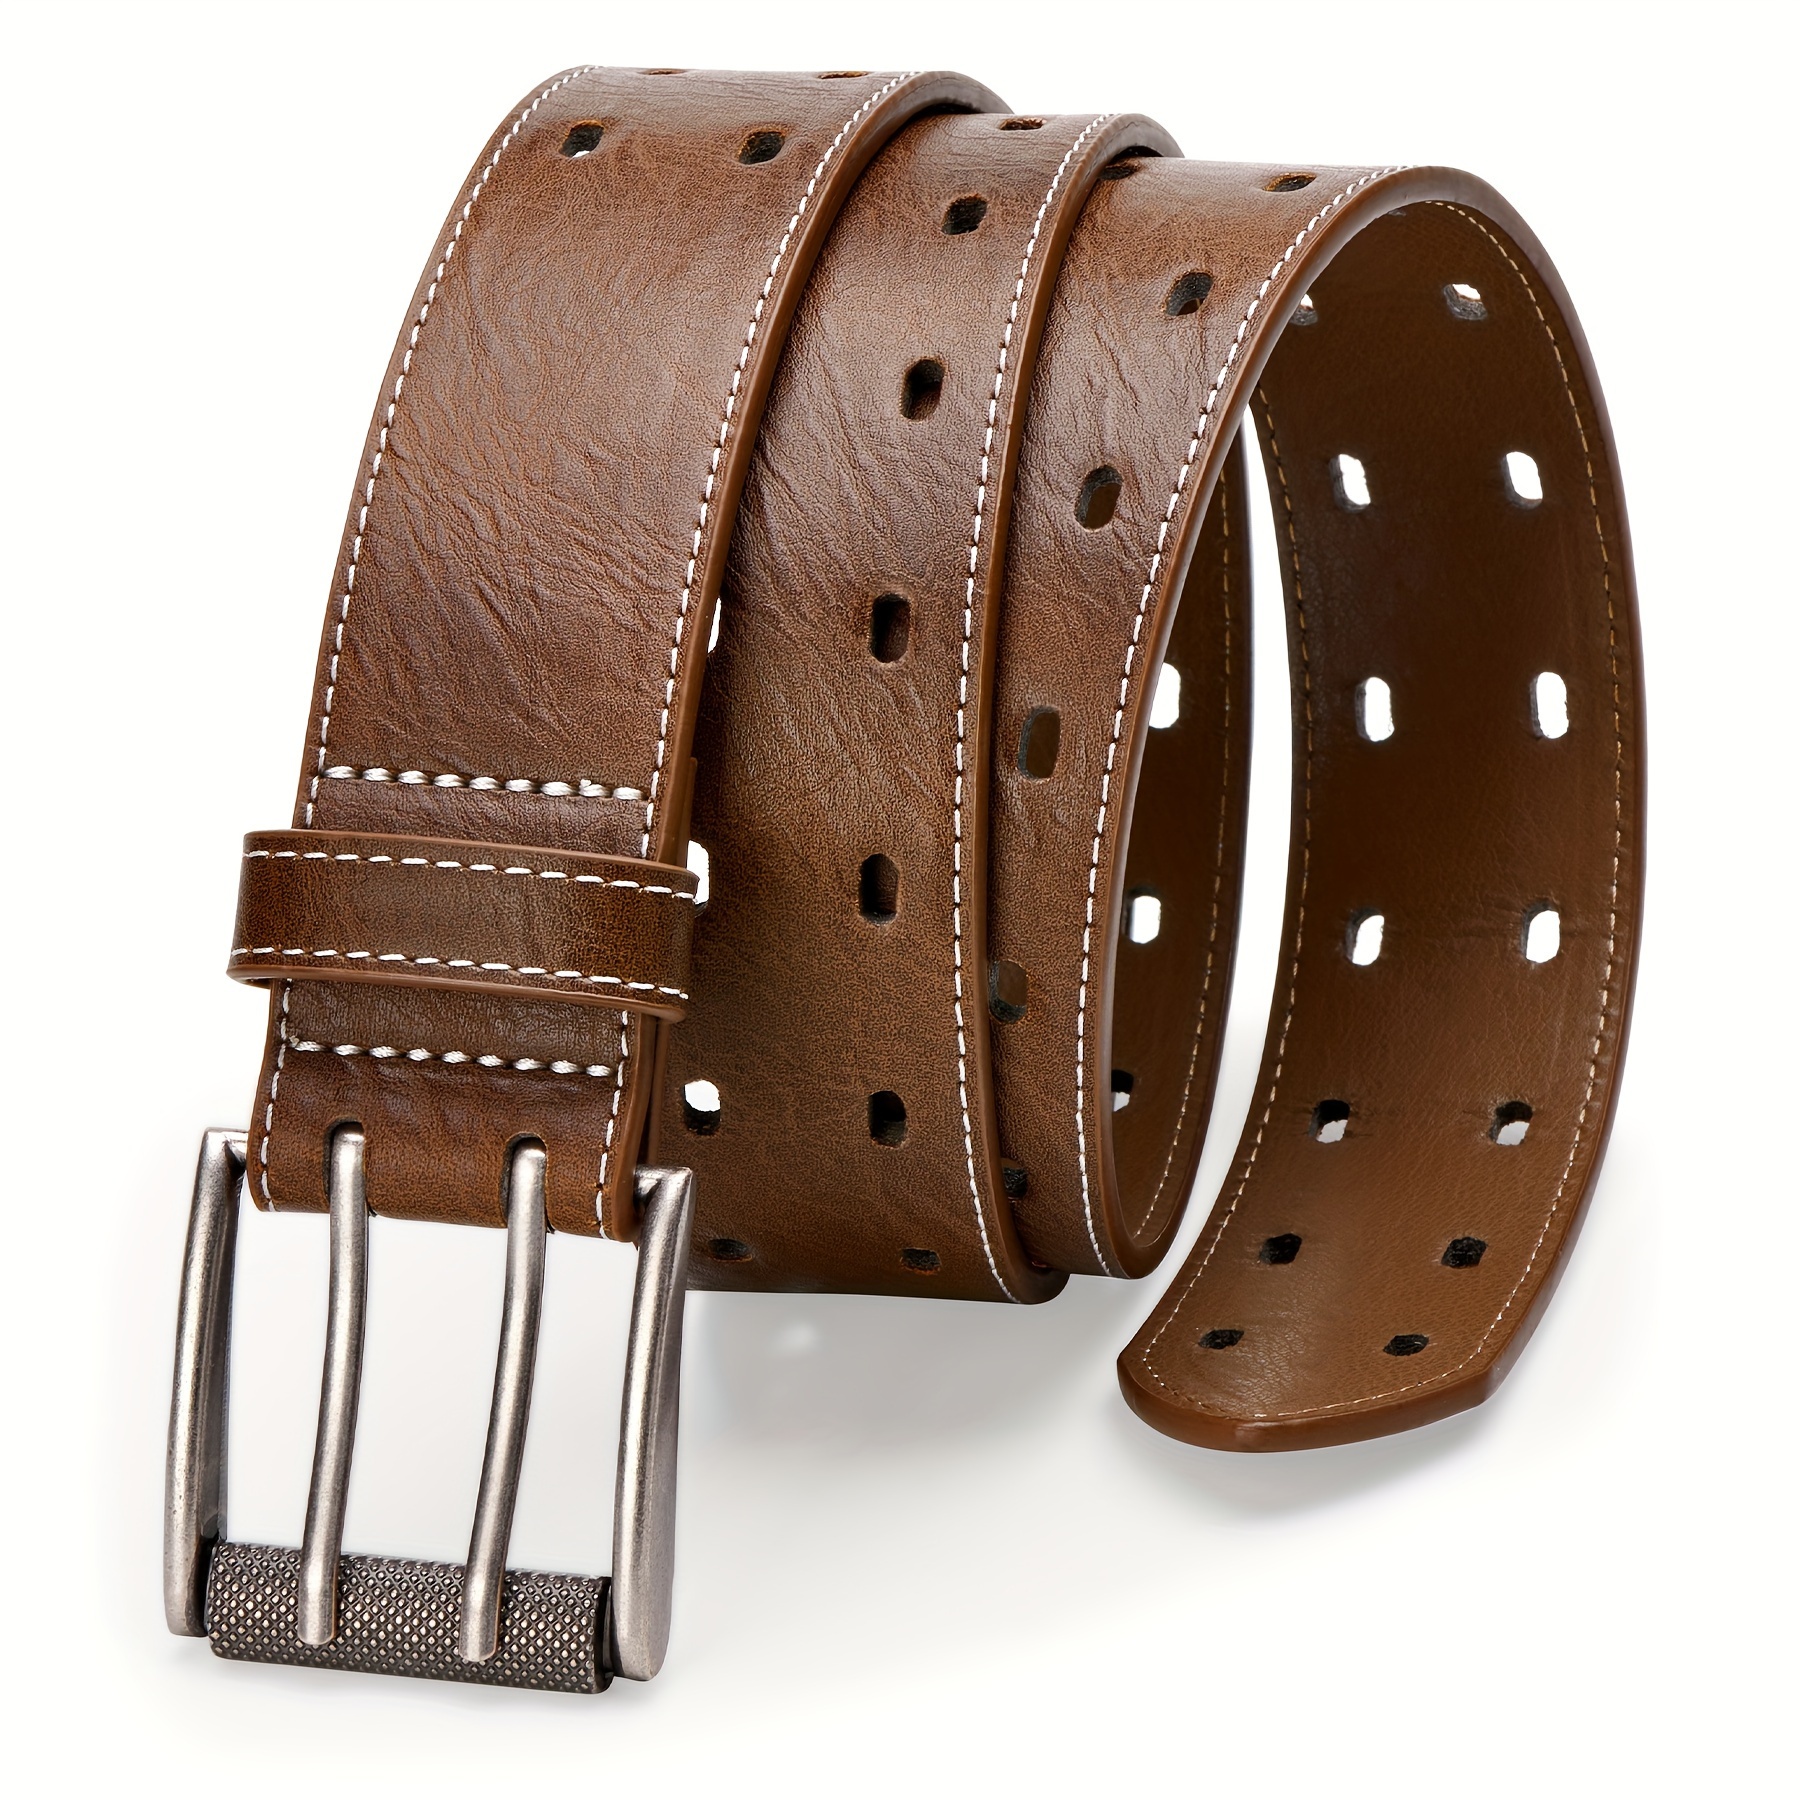 

Men's Pu Leather Double Prong Belt, Fashion Classic Casual Belt, Belts For Jeans Pants, Perfect Gift For Dad & Husband